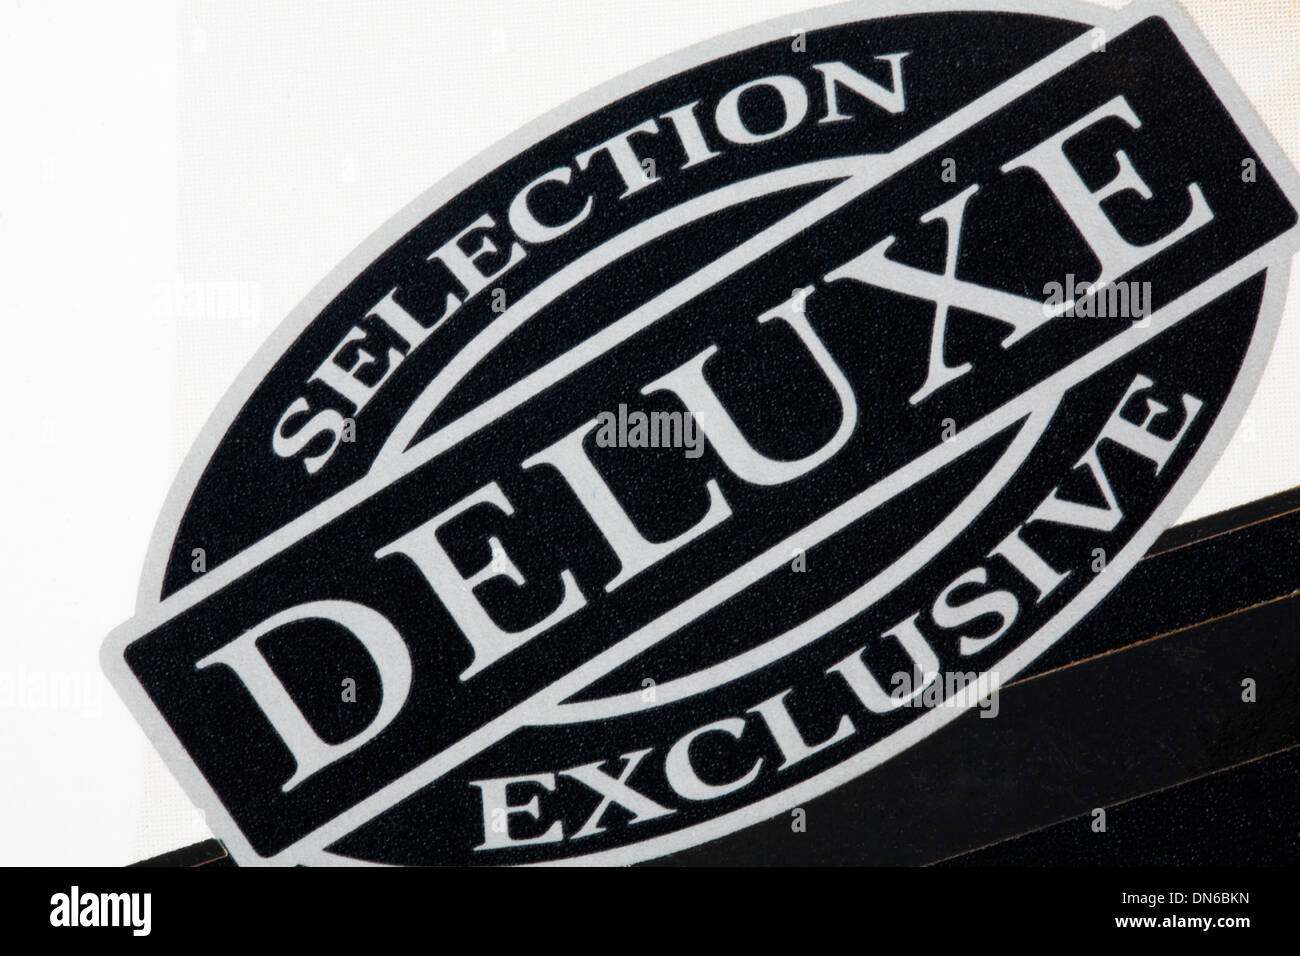 Deluxe selection exclusive logo on food packaging Stock Photo